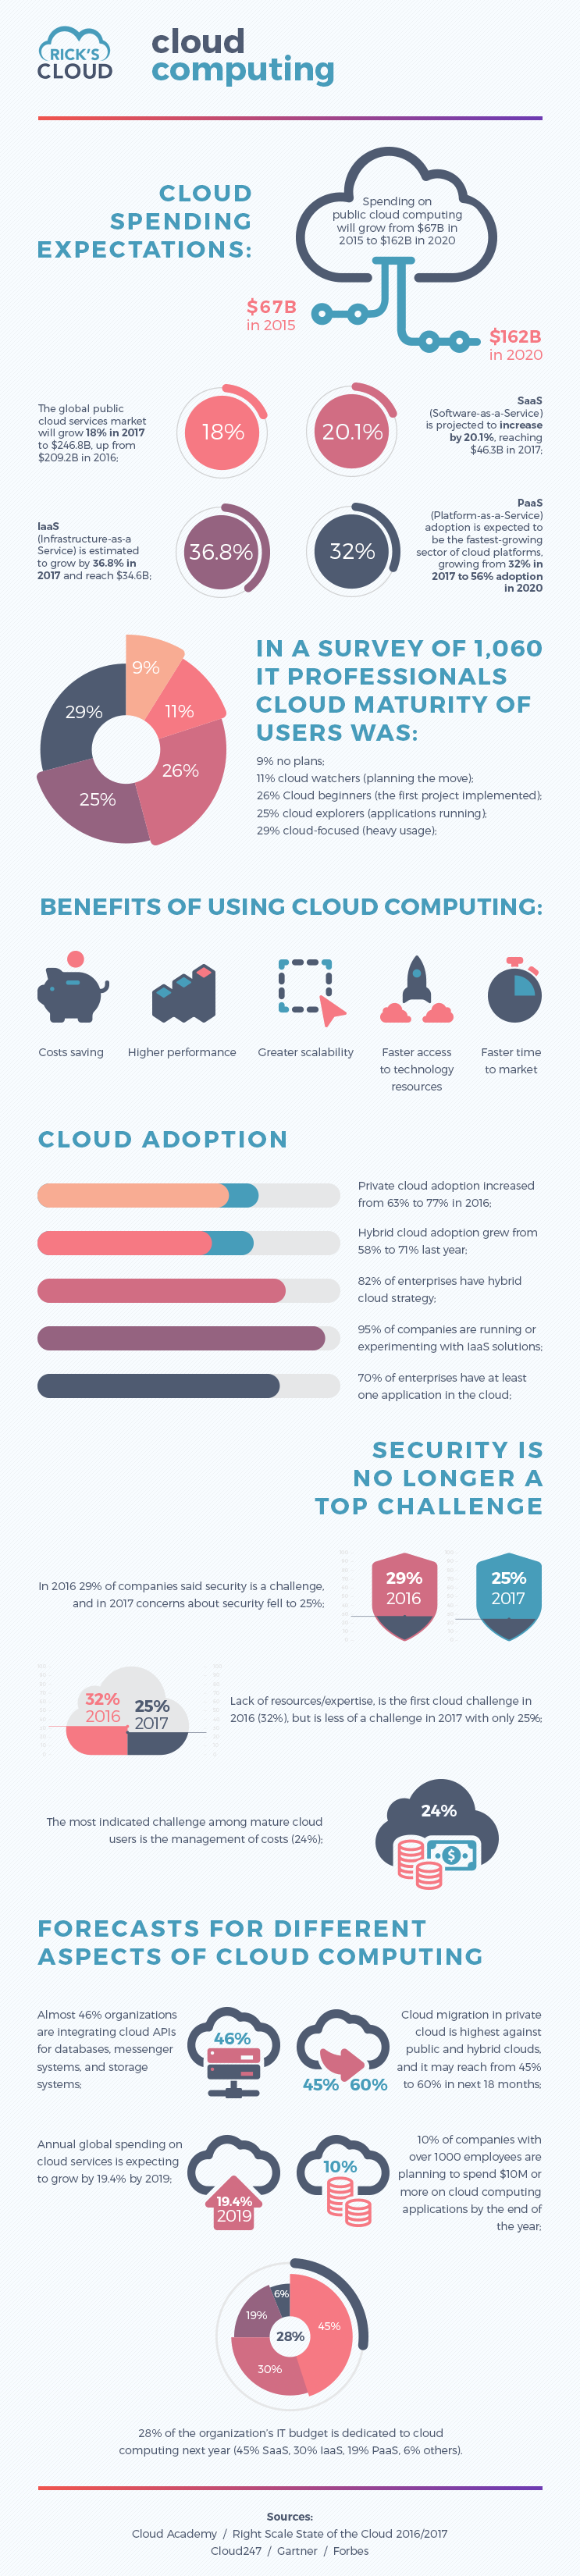 A Snapshot of the Movement to Cloud Computing [#Infographic] | FedTech Magazine